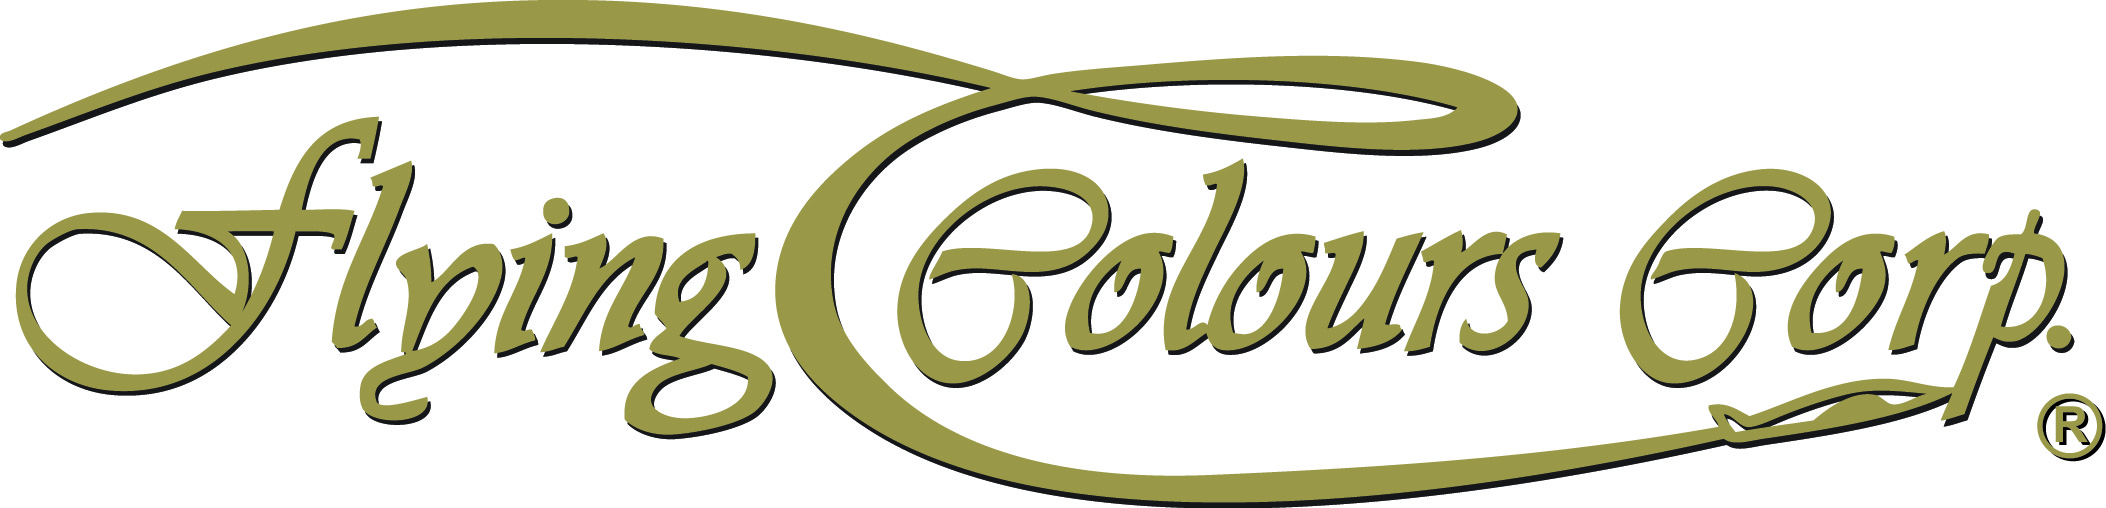 Flying Colours Corp logo